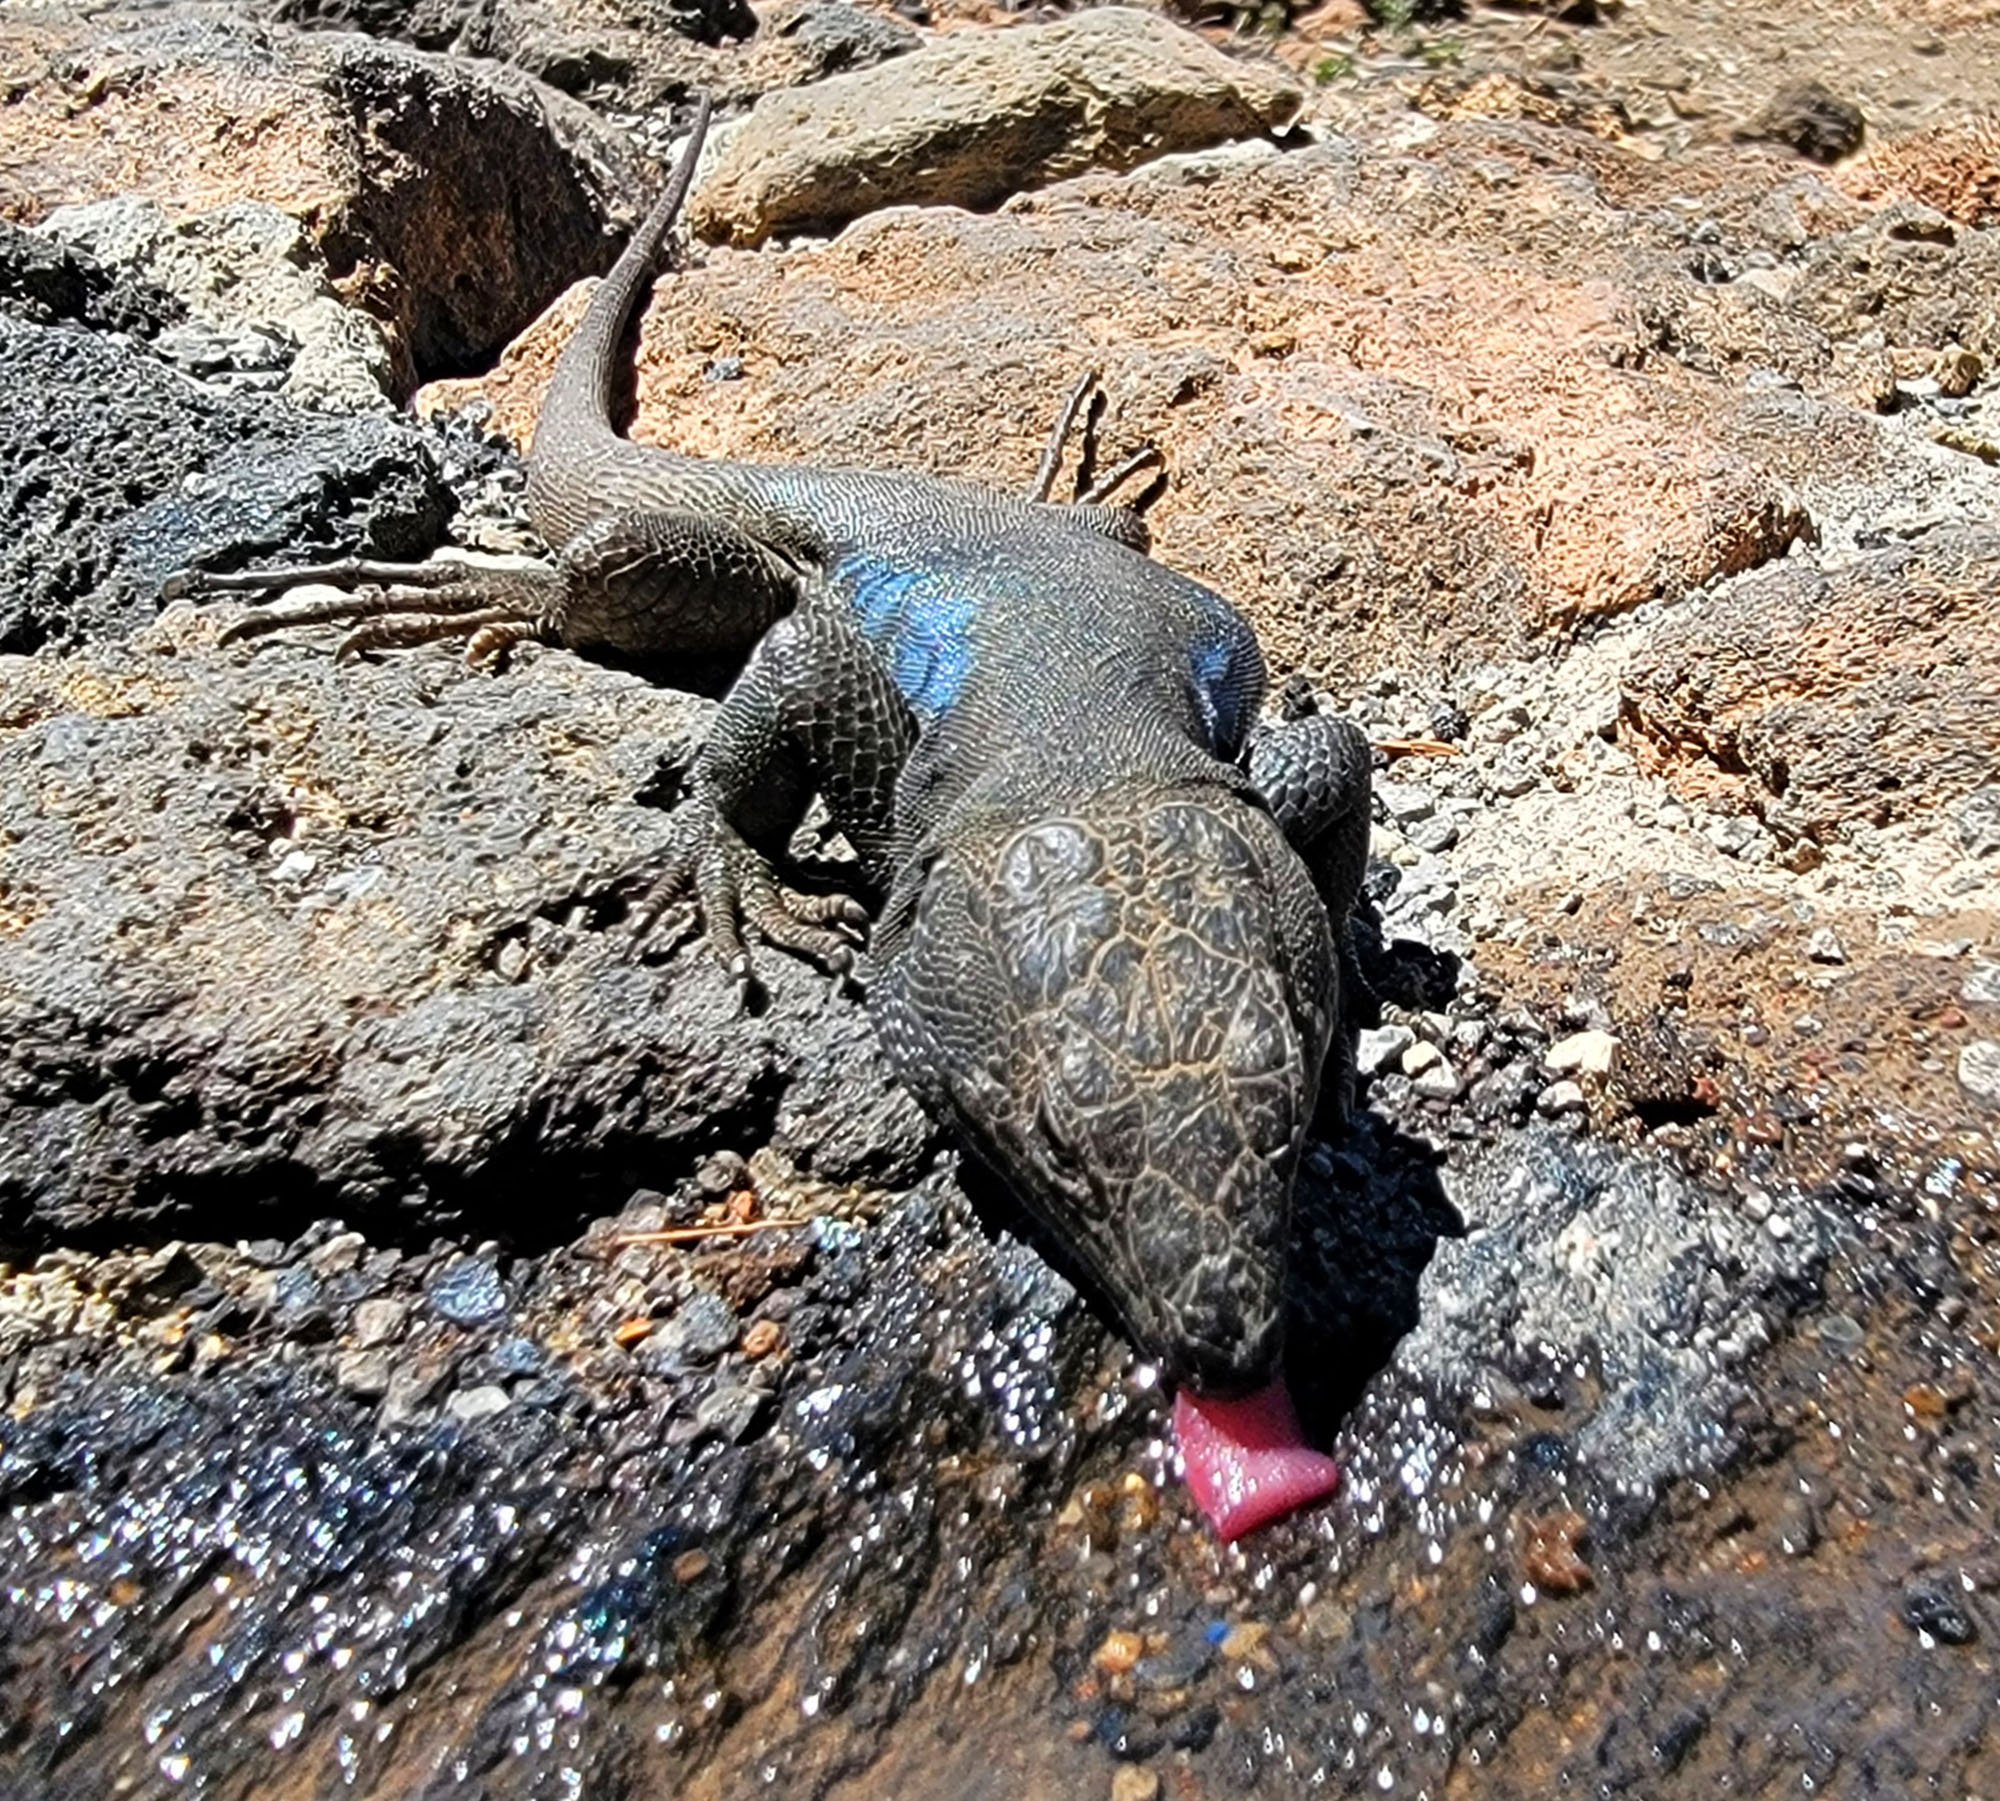 Little Tenerife lizard sipping from  a puddle on a rock wall. Tourists feed these ones so they don't skitter away instantly when they see you.